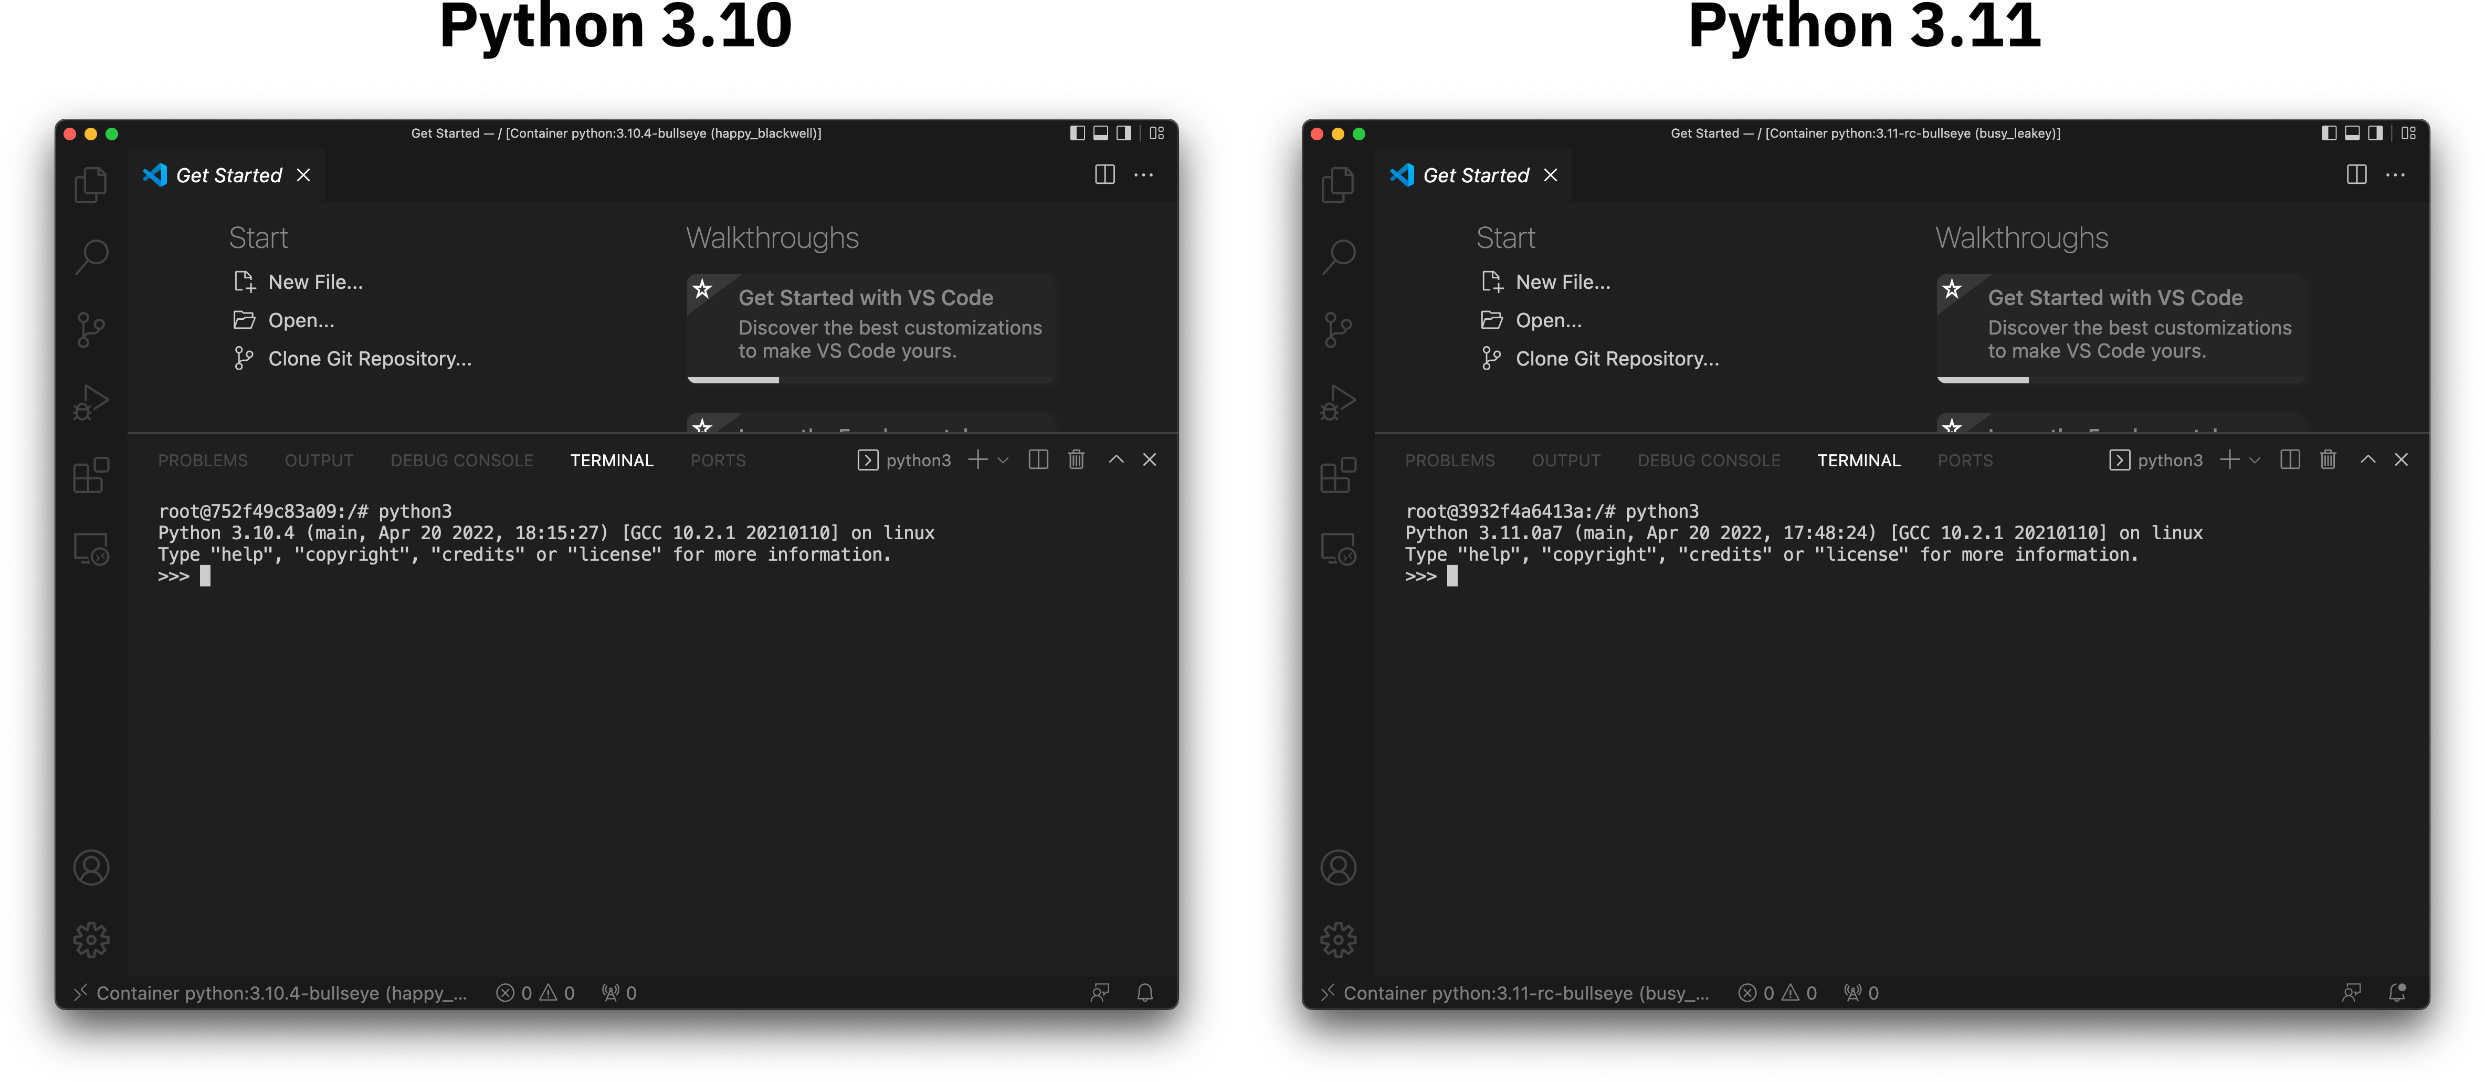 Image 1 - Python 3.10 and 3.11 containers attached in Visual Studio Code (image by author)